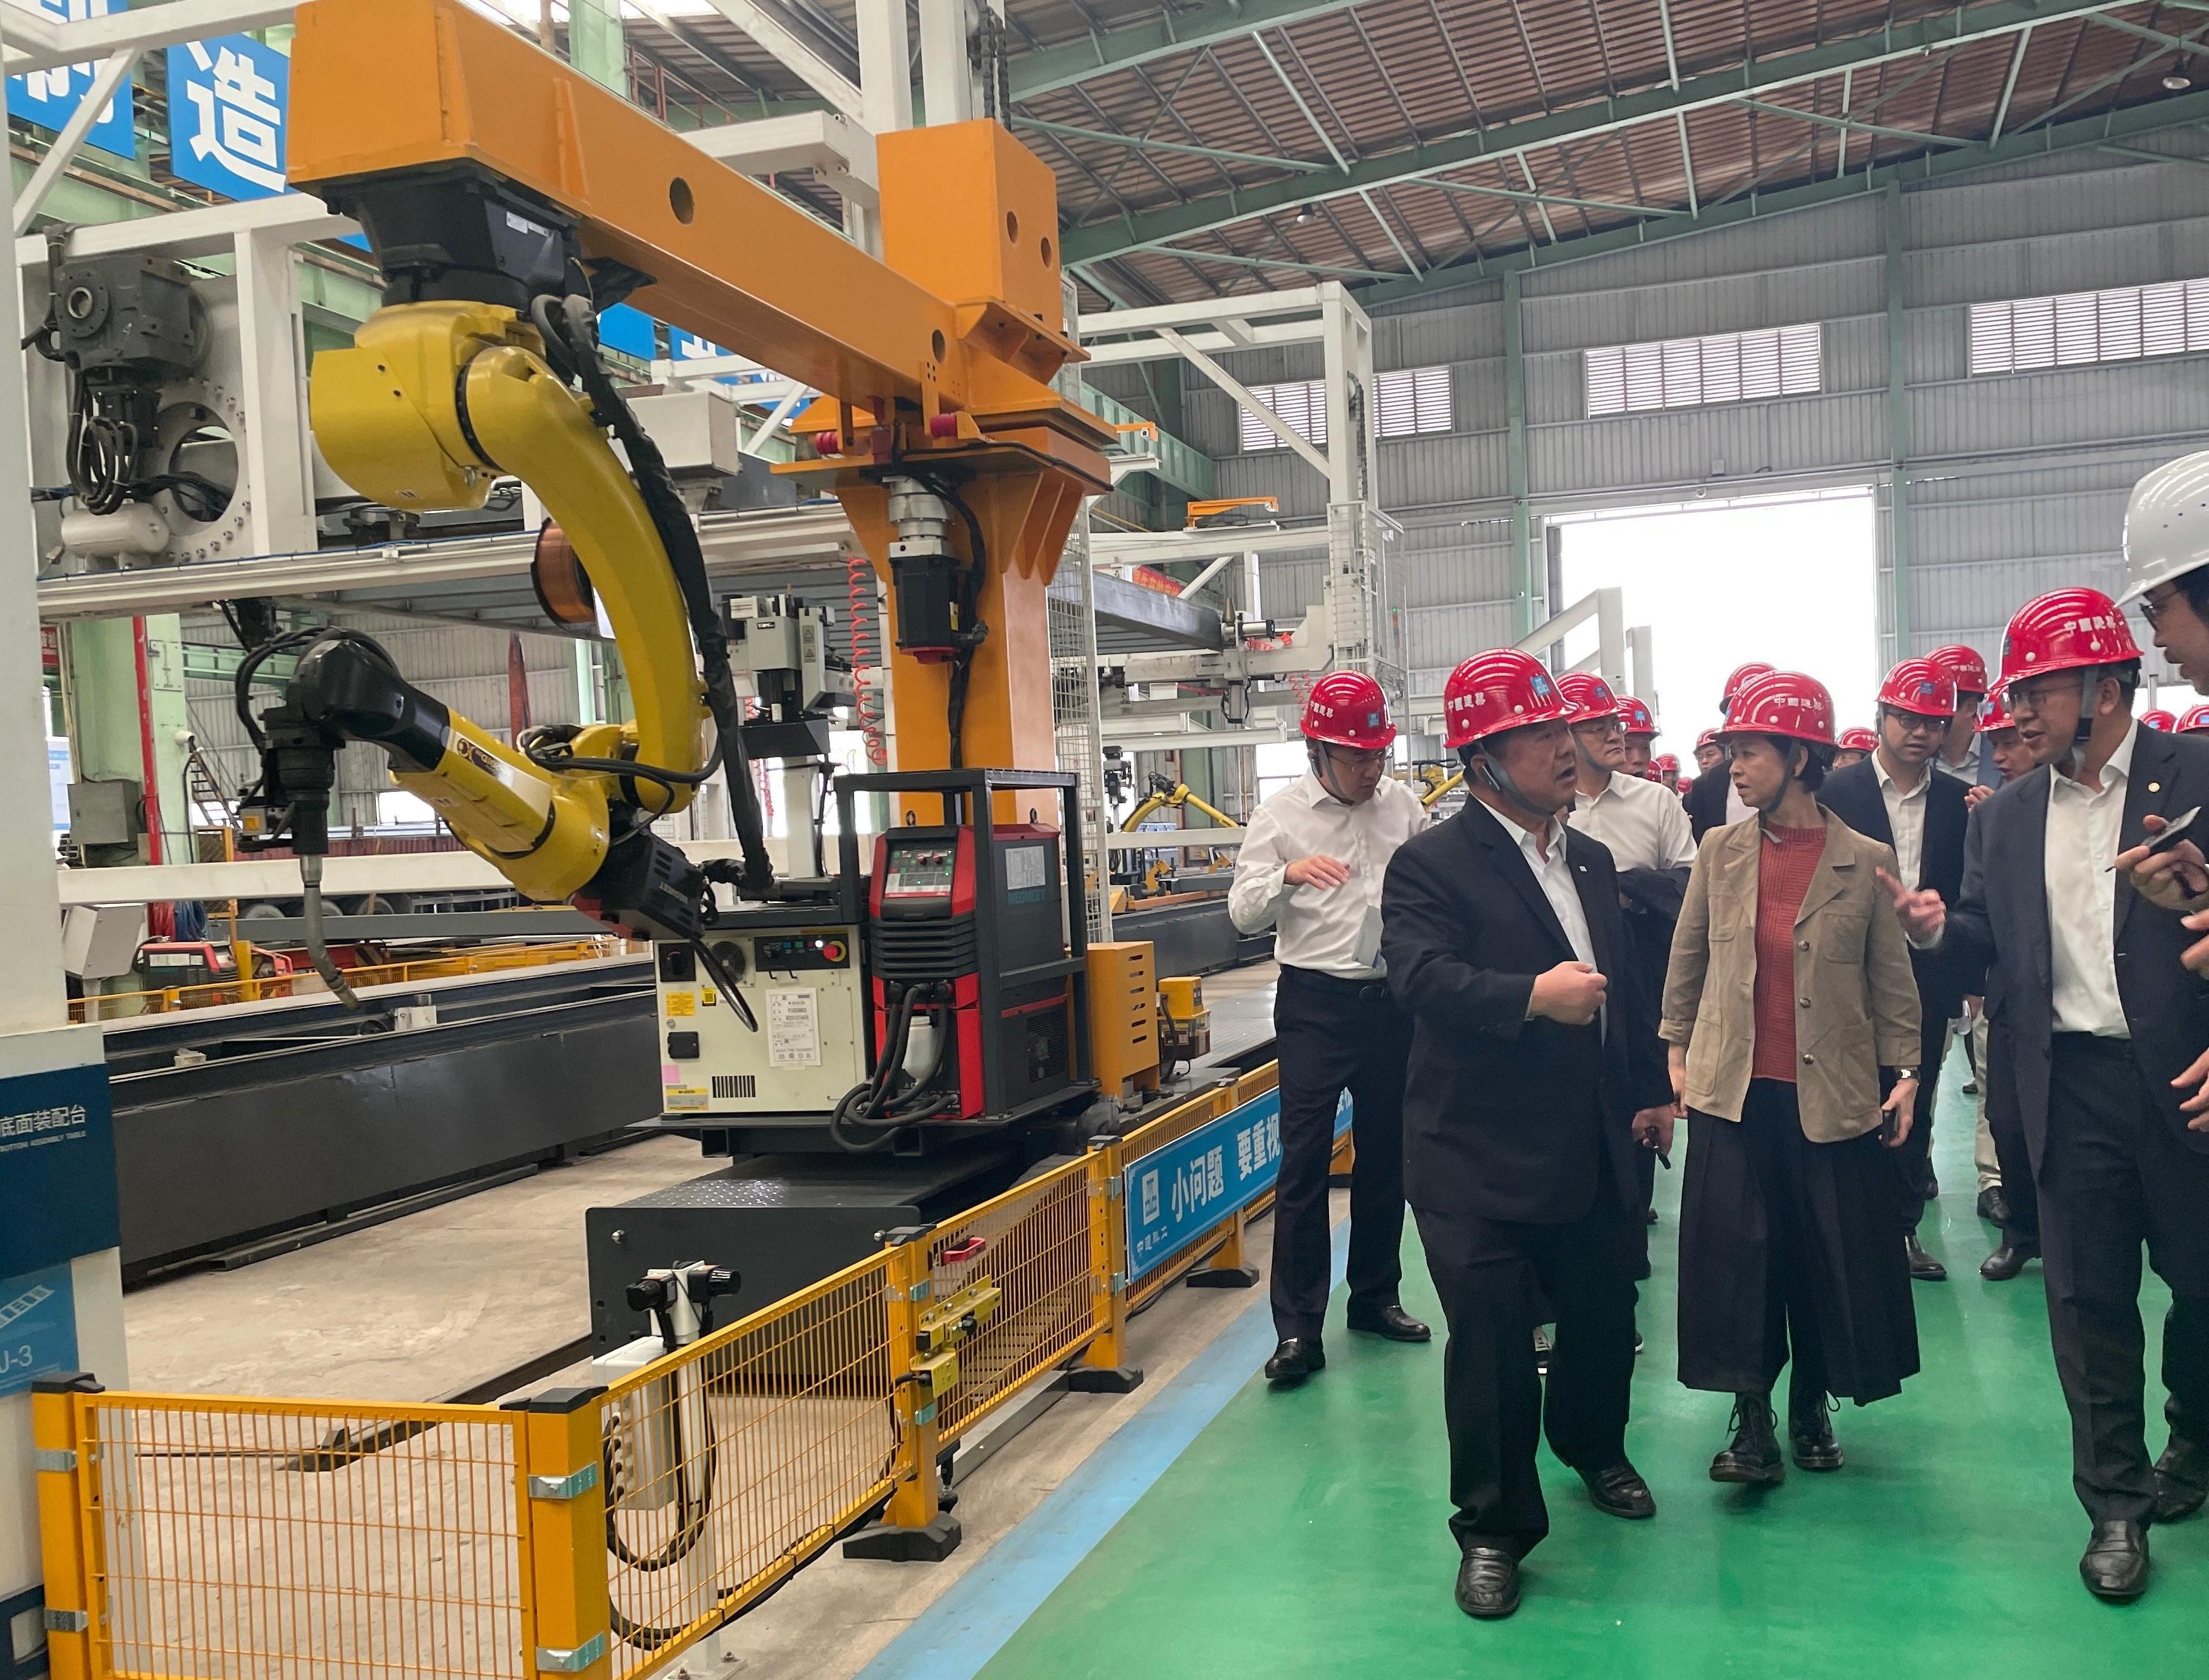 The Secretary for Housing, Ms Winnie Ho, and a delegation of representatives from the Housing Bureau and the Architectural Services Department visited Huizhou today (March 25) to inspect the production progress of Modular Integrated Construction (MiC) modules of Light Public Housing (LPH). Photo shows Ms Ho (front row, centre) visiting CSCEC Science and Industry Greentech Corporation Limited to inspect the factory manufacturing LPH MiC modules.